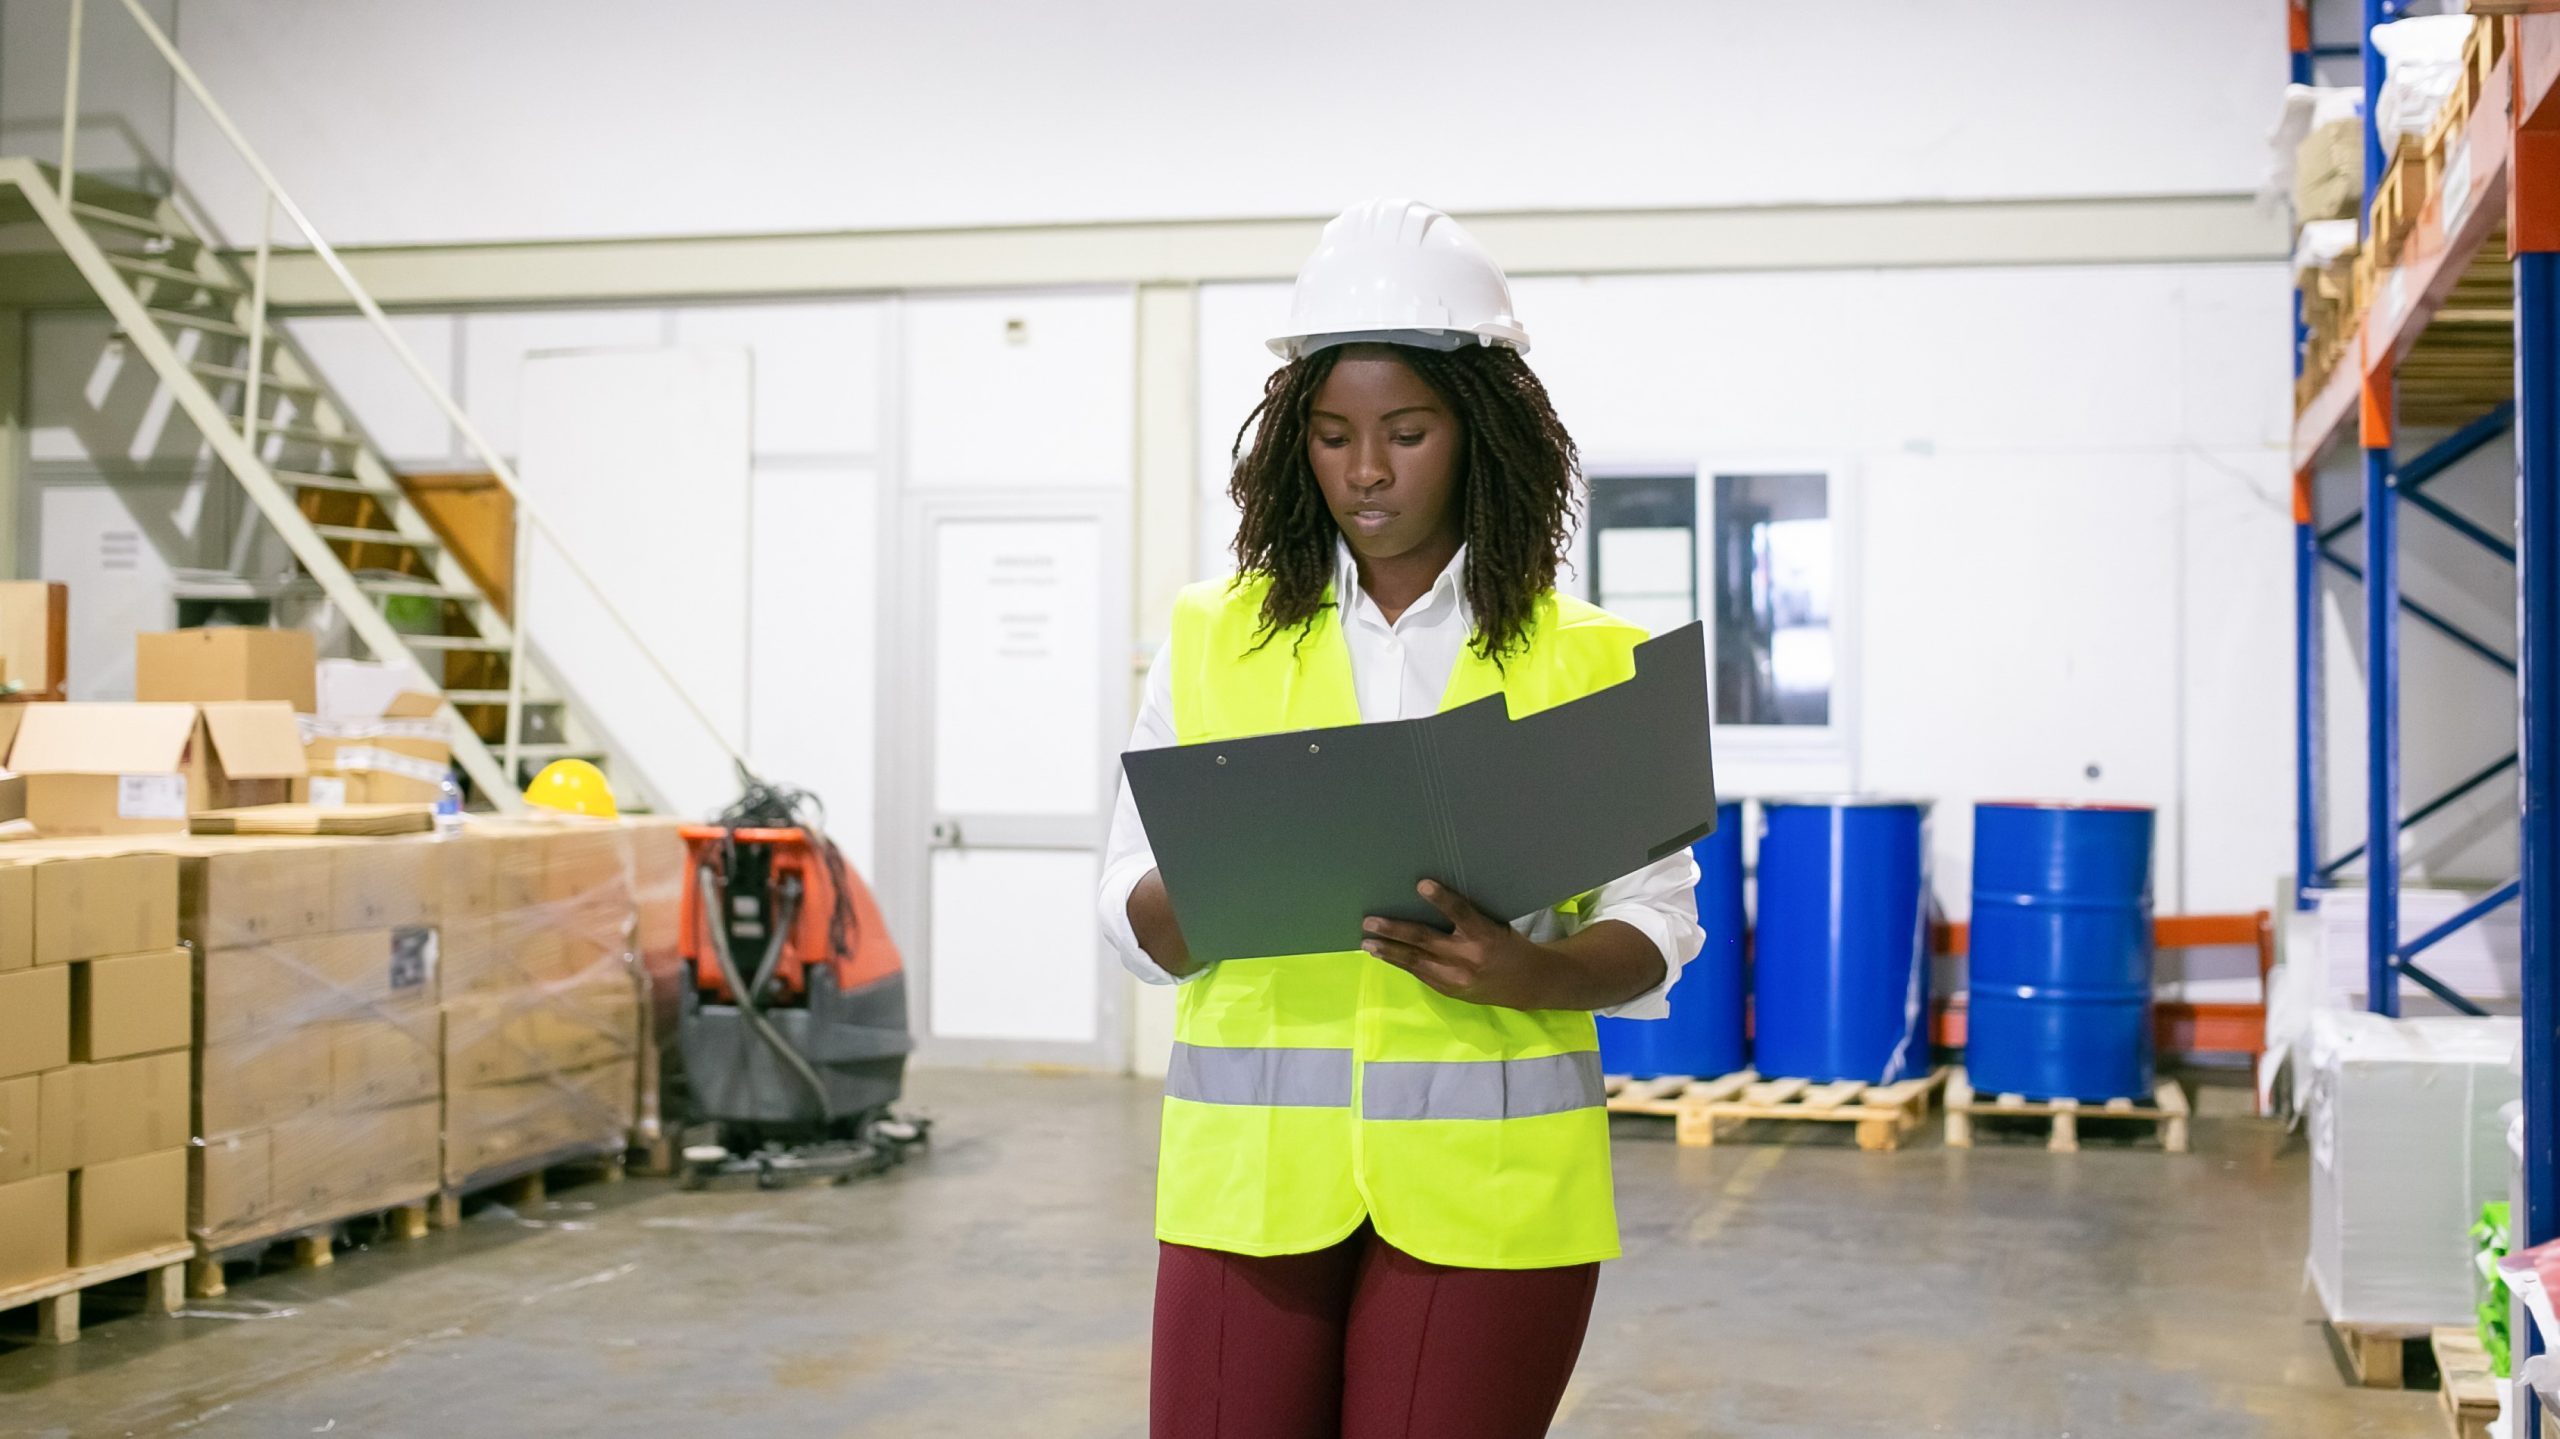 Focused female logistic employee in hardhat and safety vest walking in warehouse, carrying open folder, looking through document. Copy space, front view. Labor and inspection concept